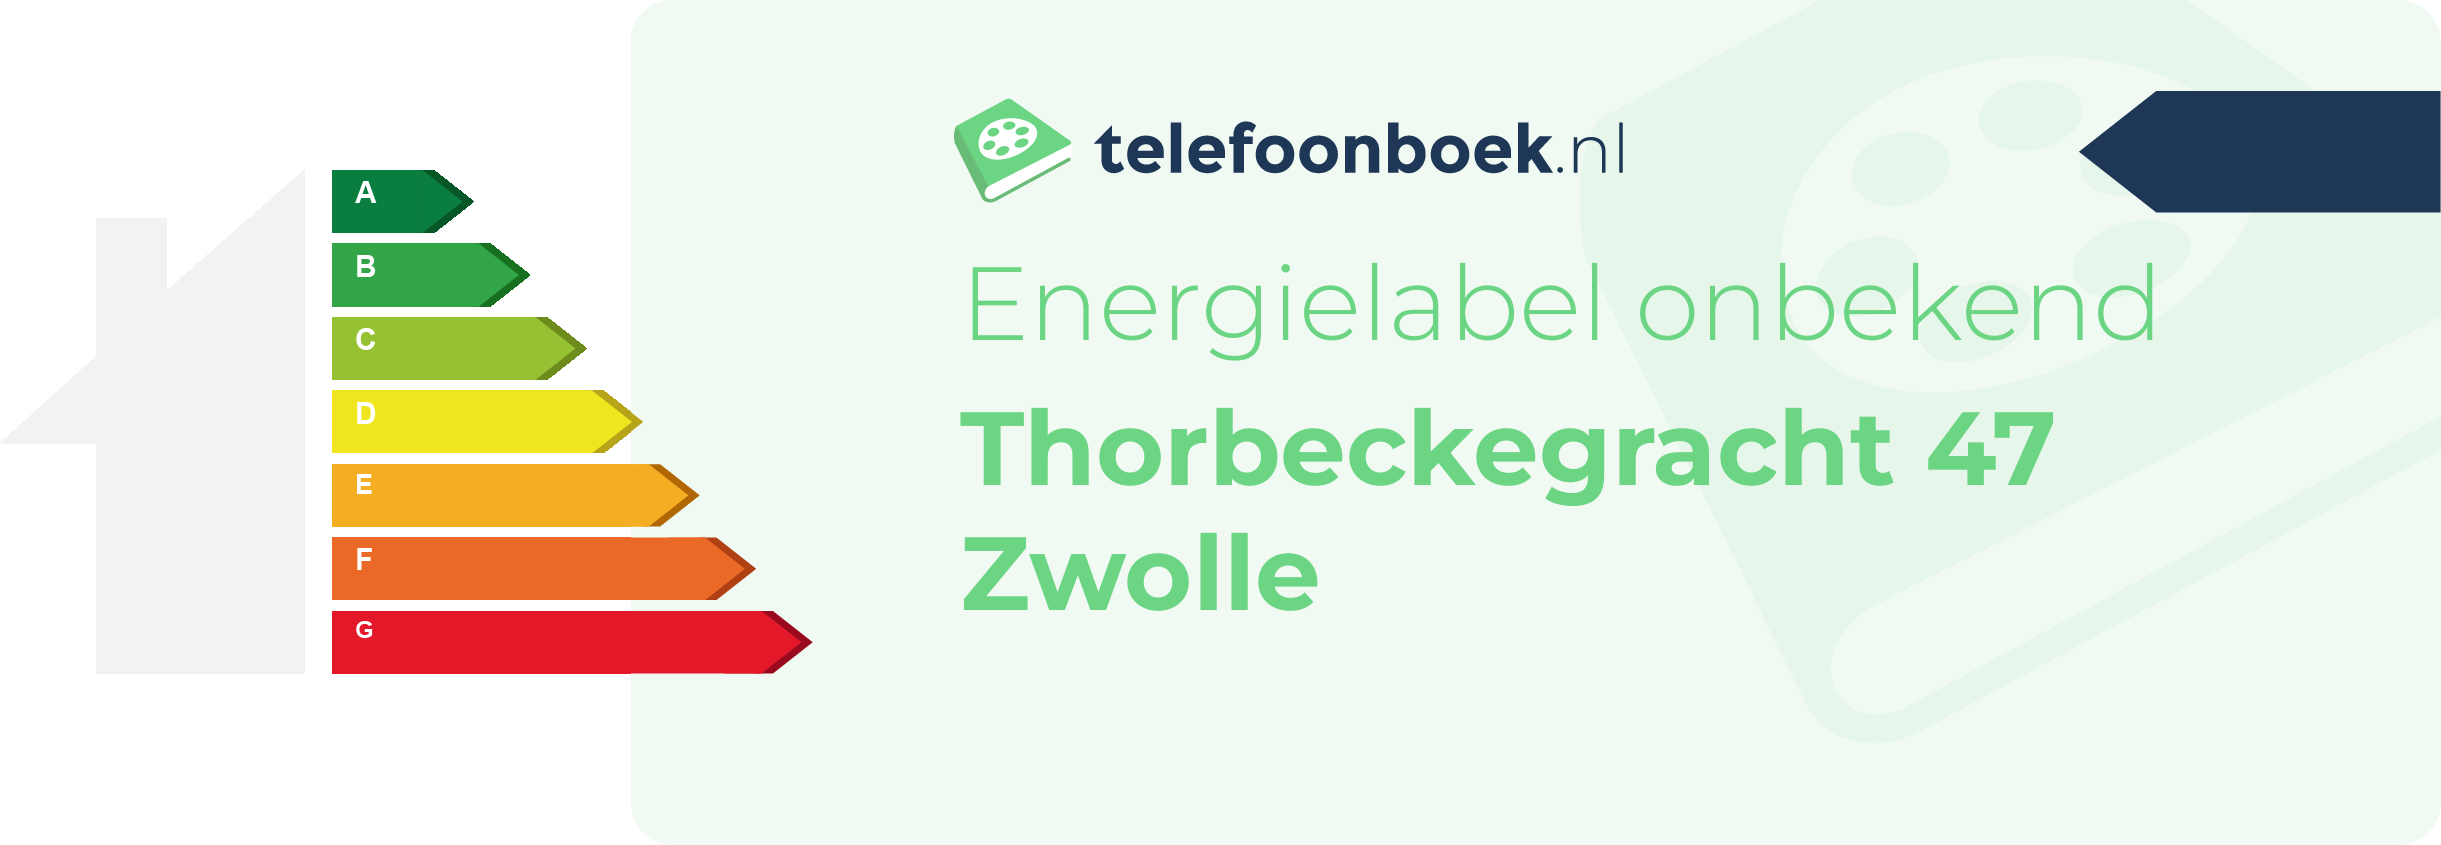 Energielabel Thorbeckegracht 47 Zwolle